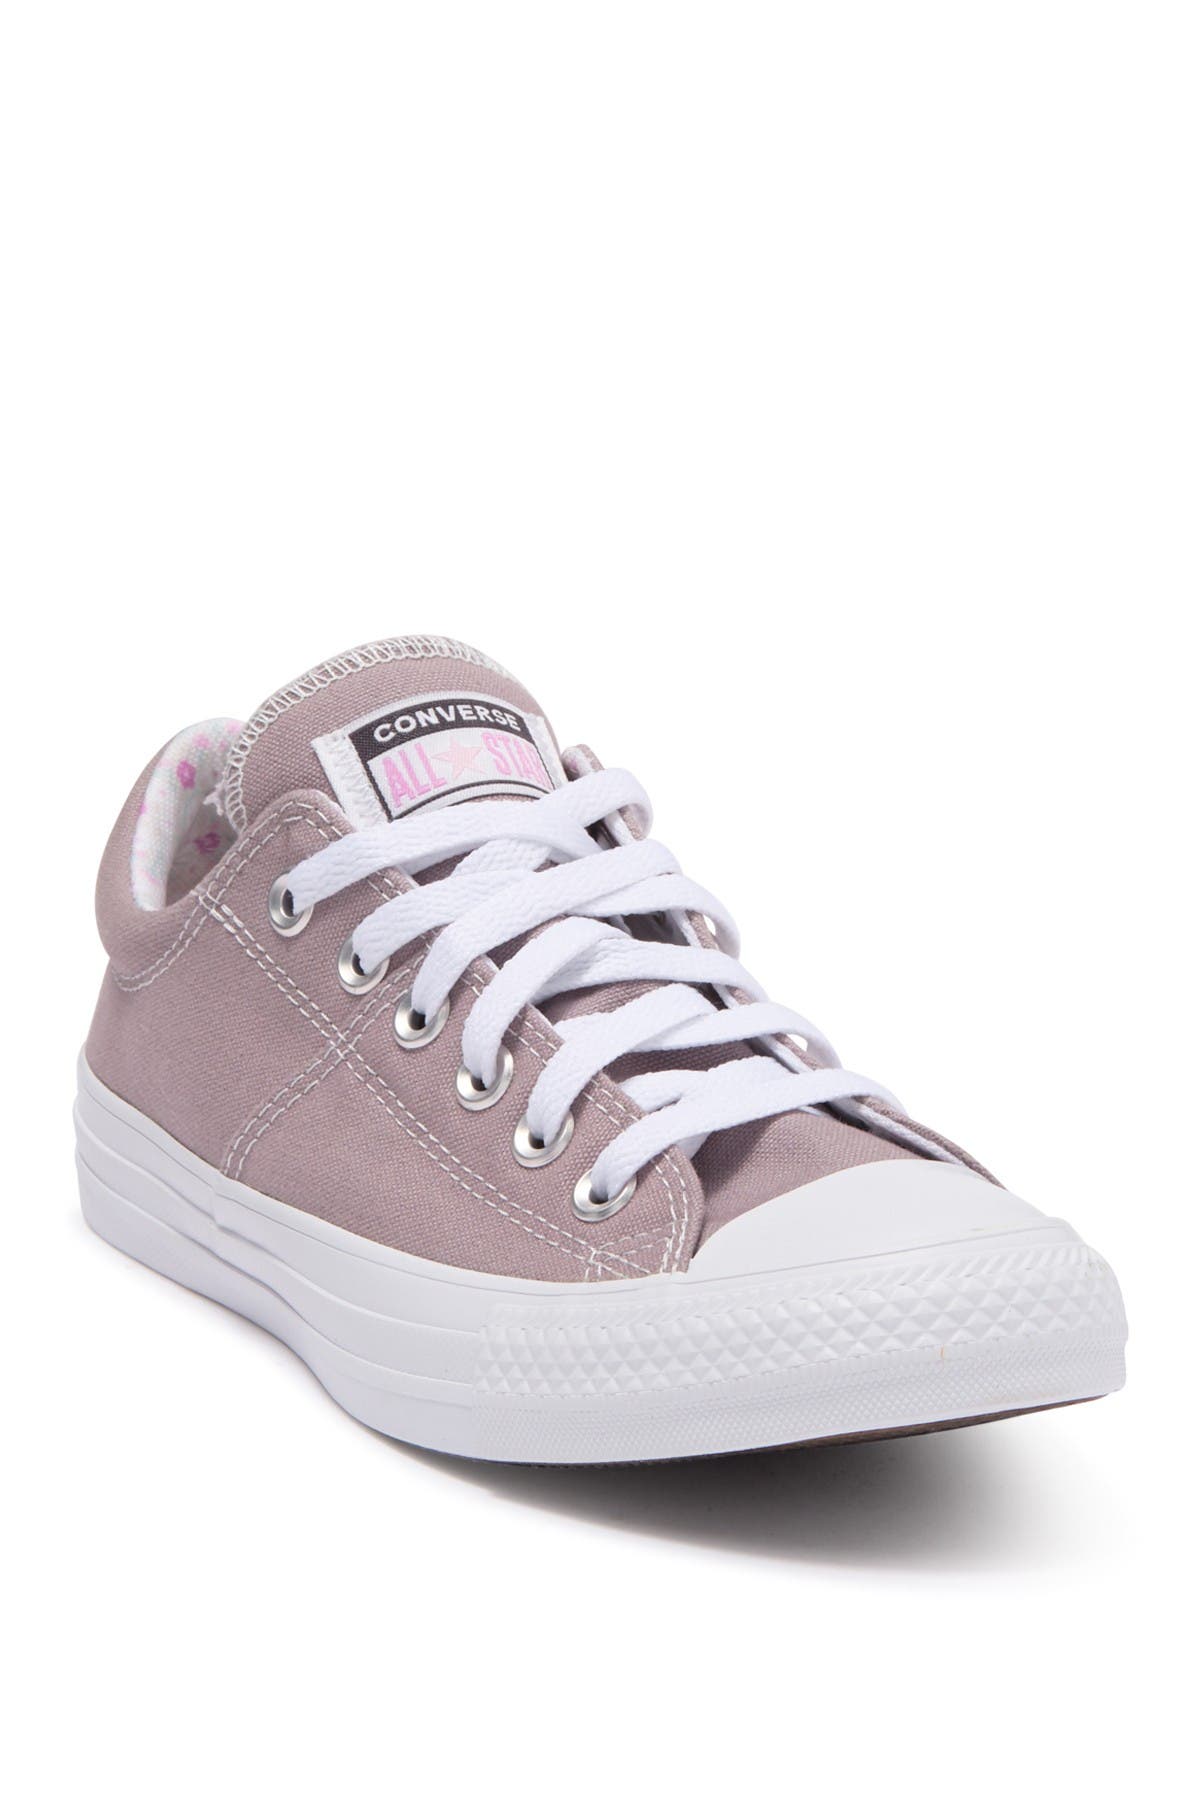 chuck taylor all star madison oxford sneaker